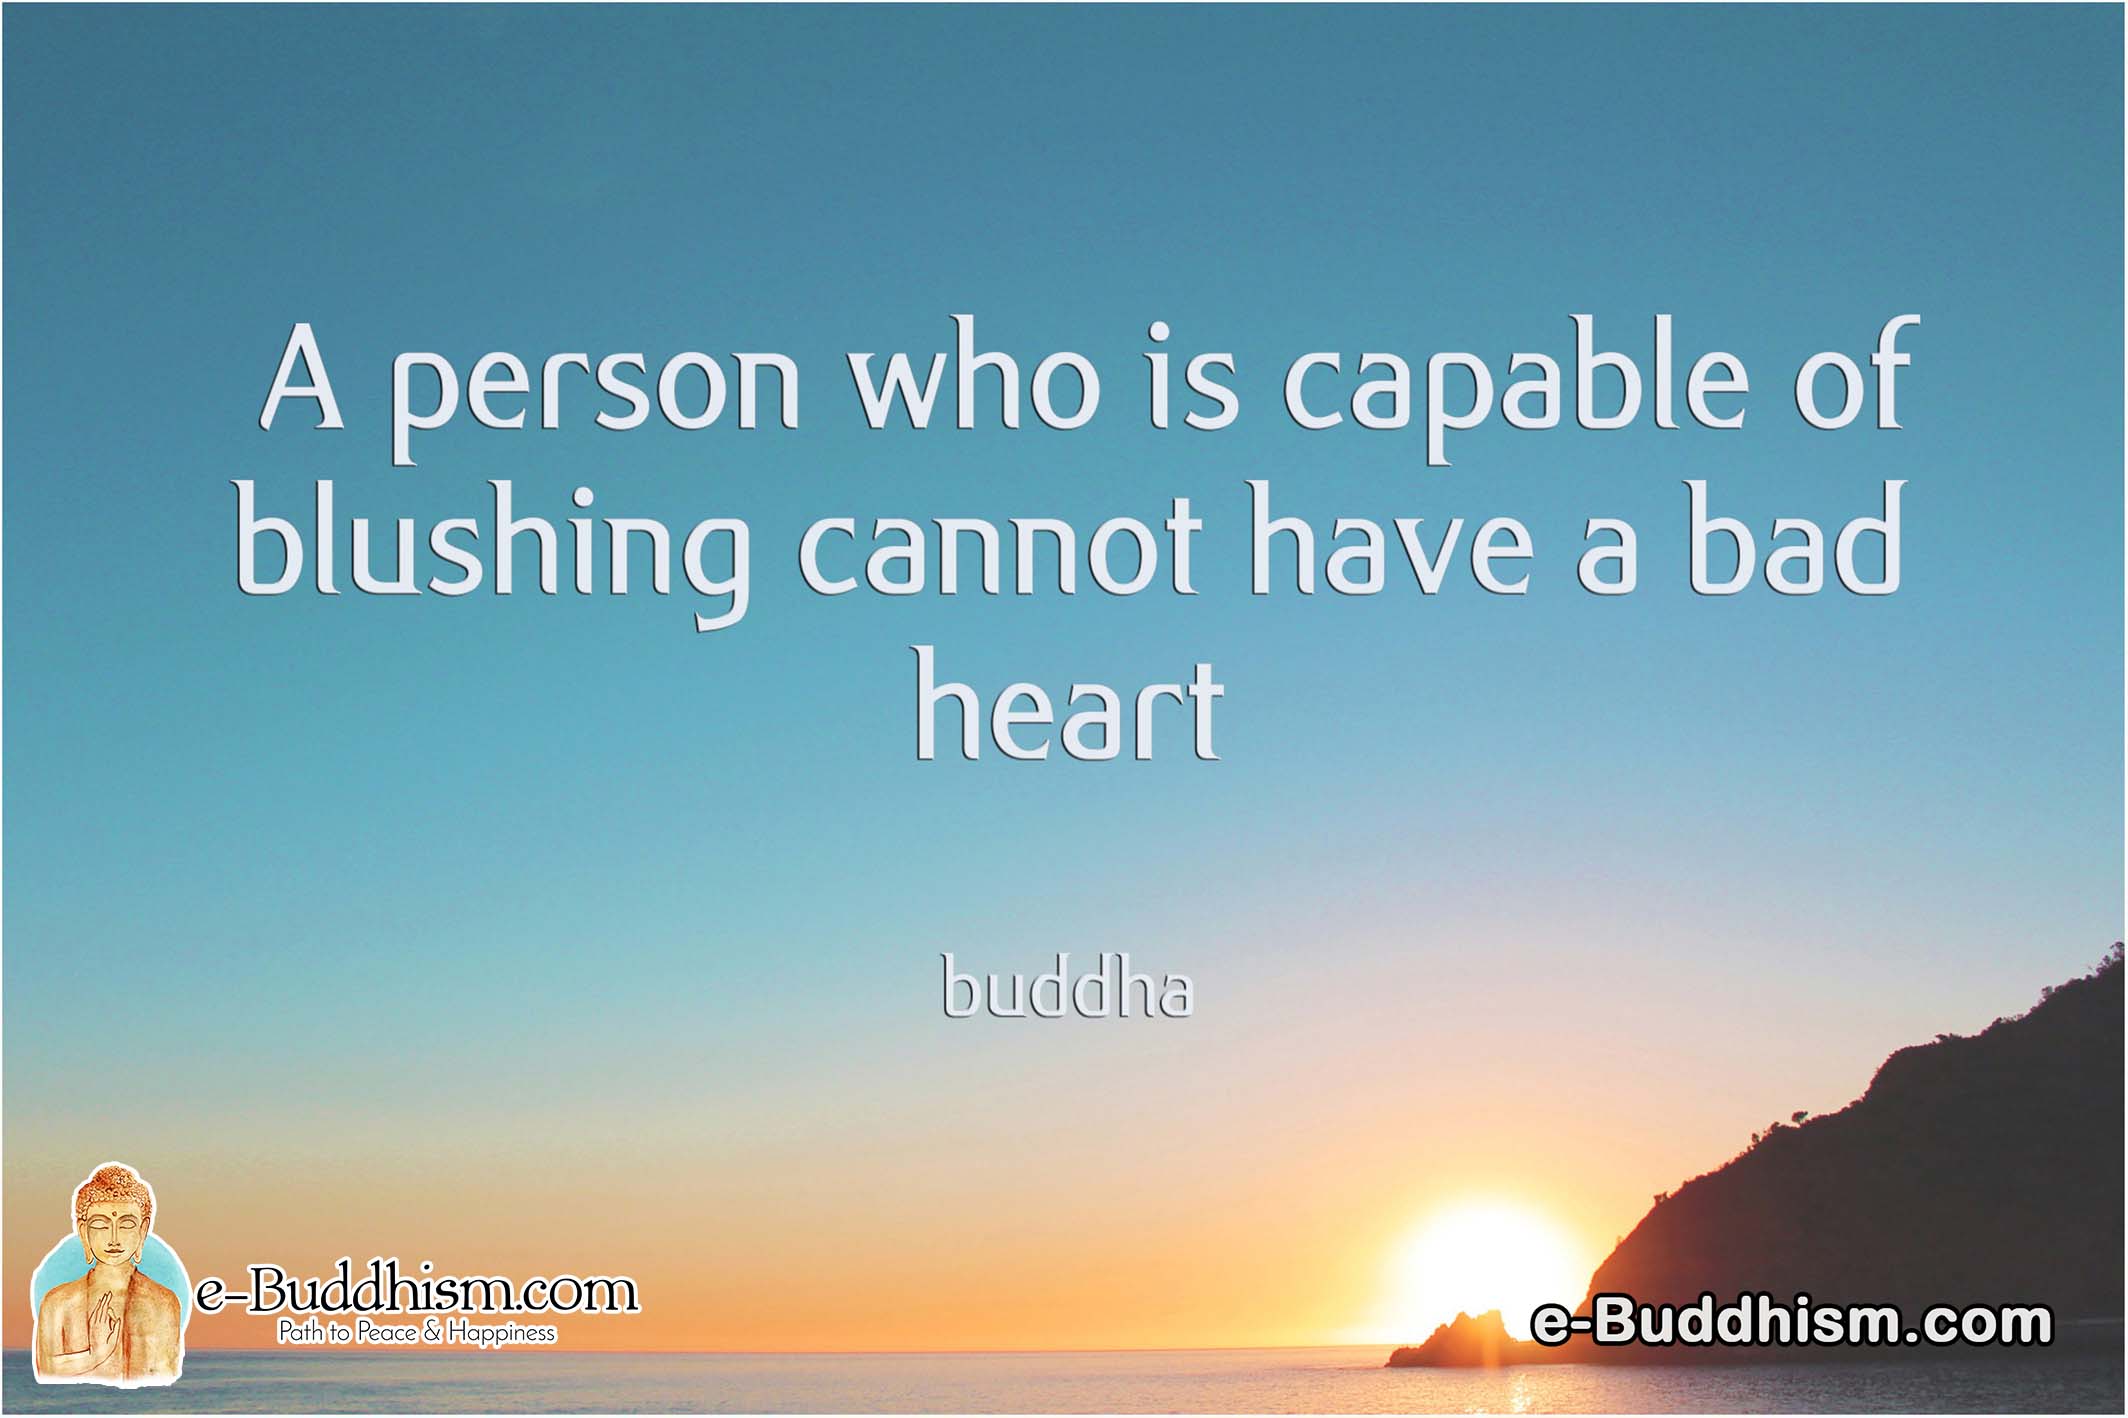 A person who is capable of blushing cannot have a bad heart. -Buddha